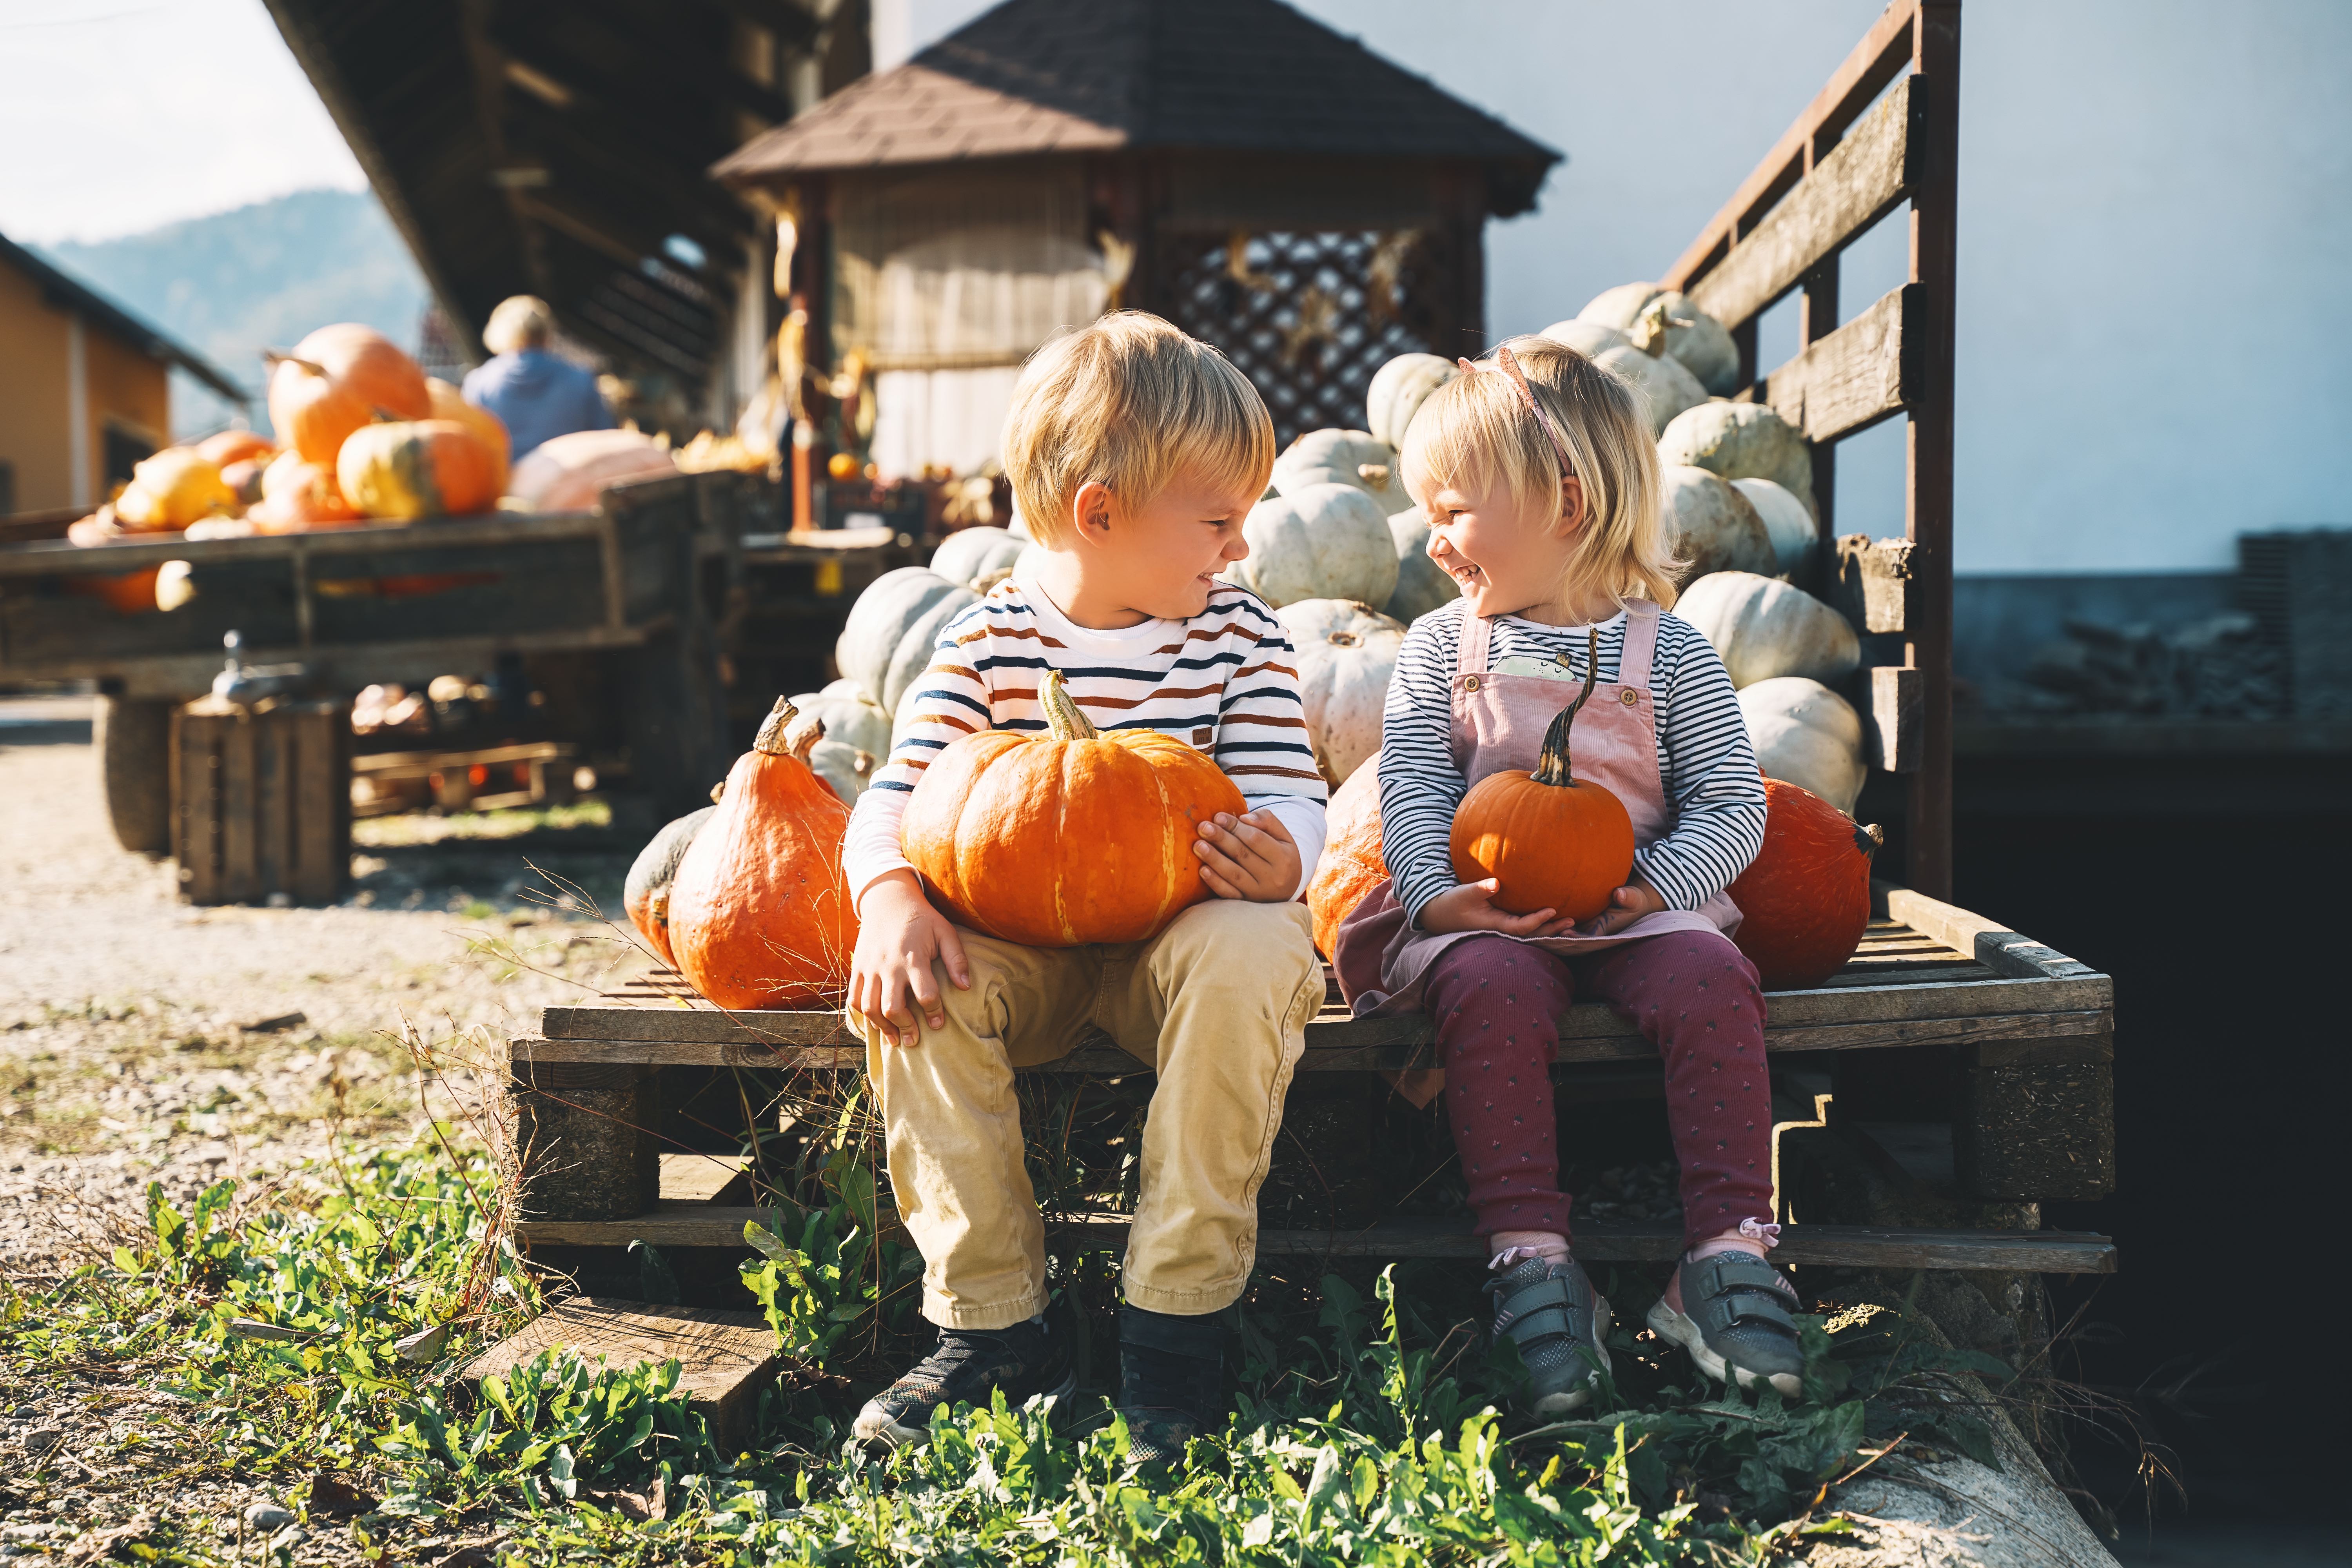 children sitting with pumpkins at a farmers market